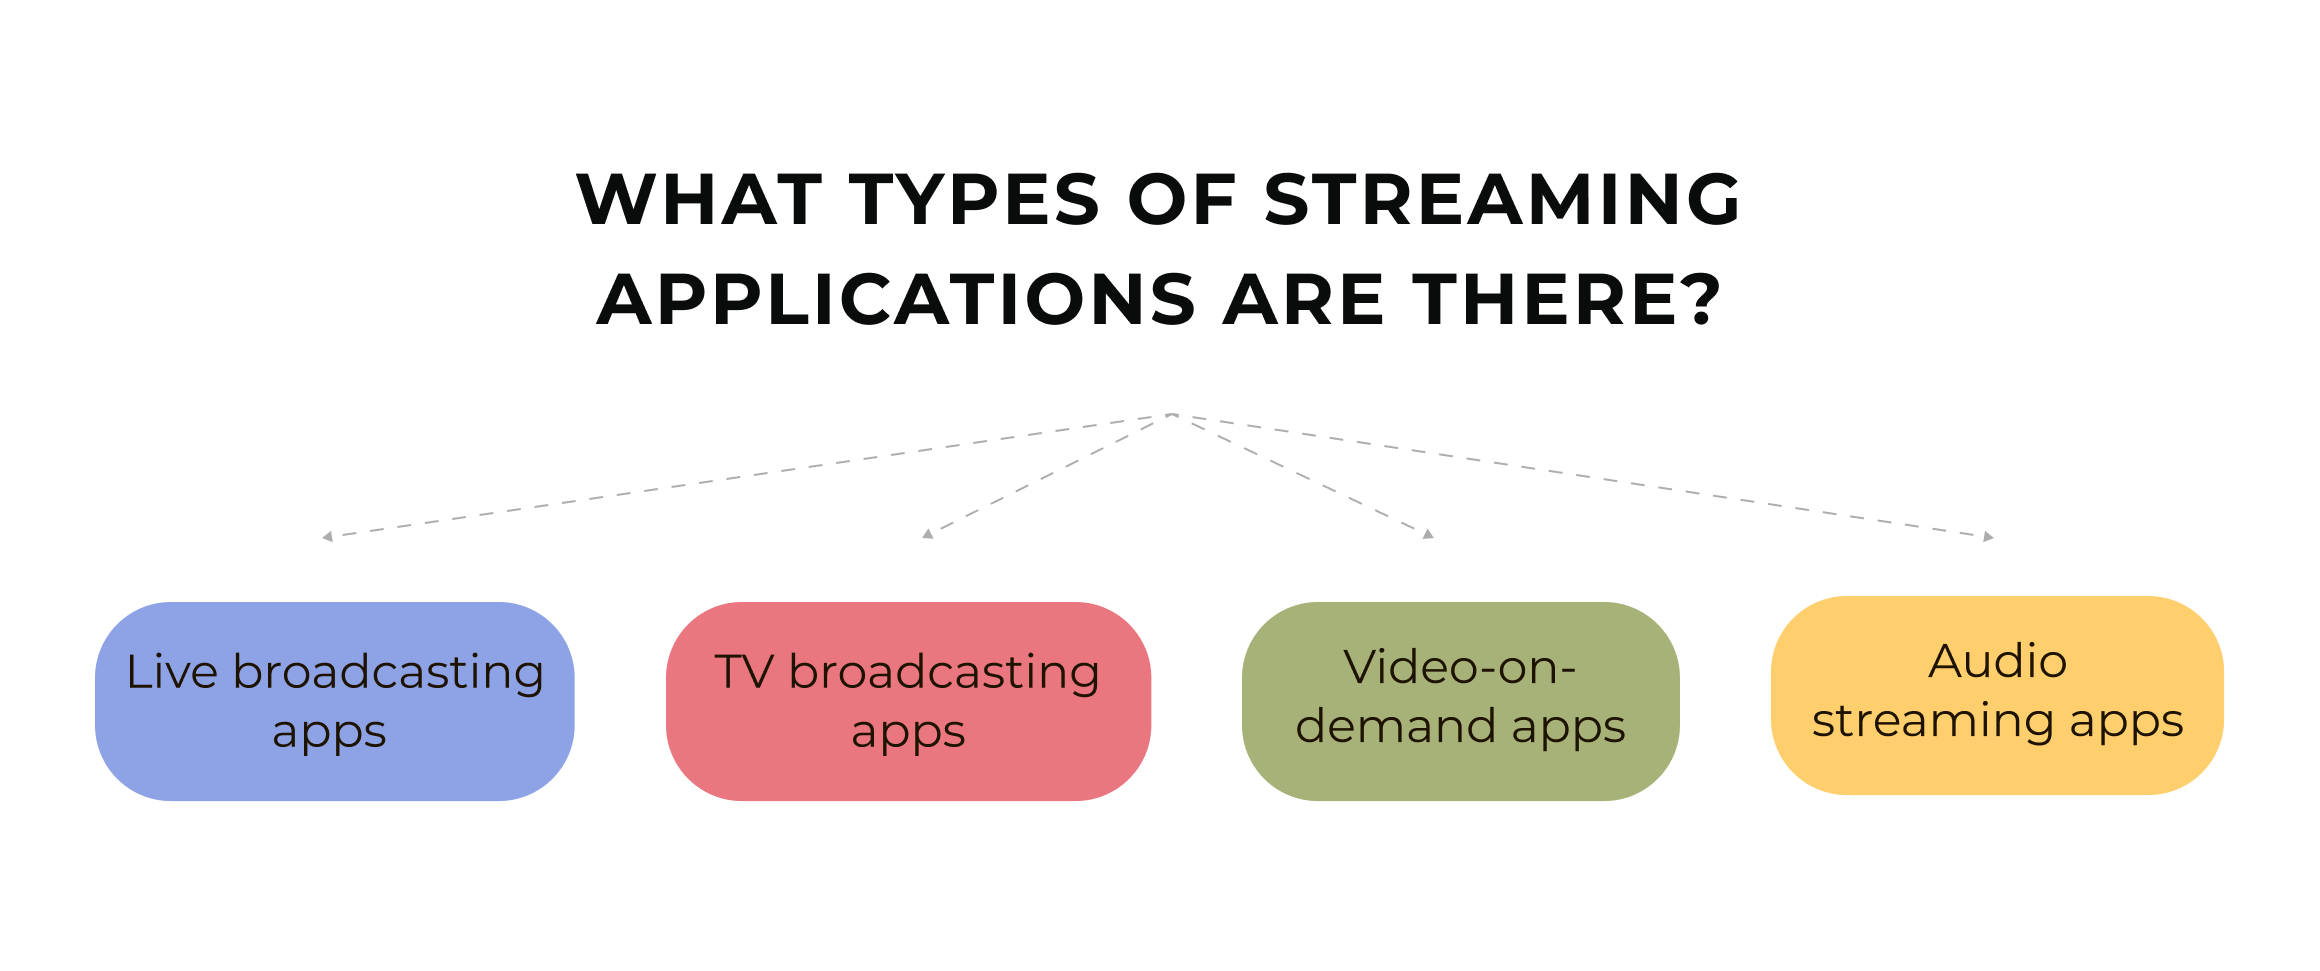 Types of streaming applications 